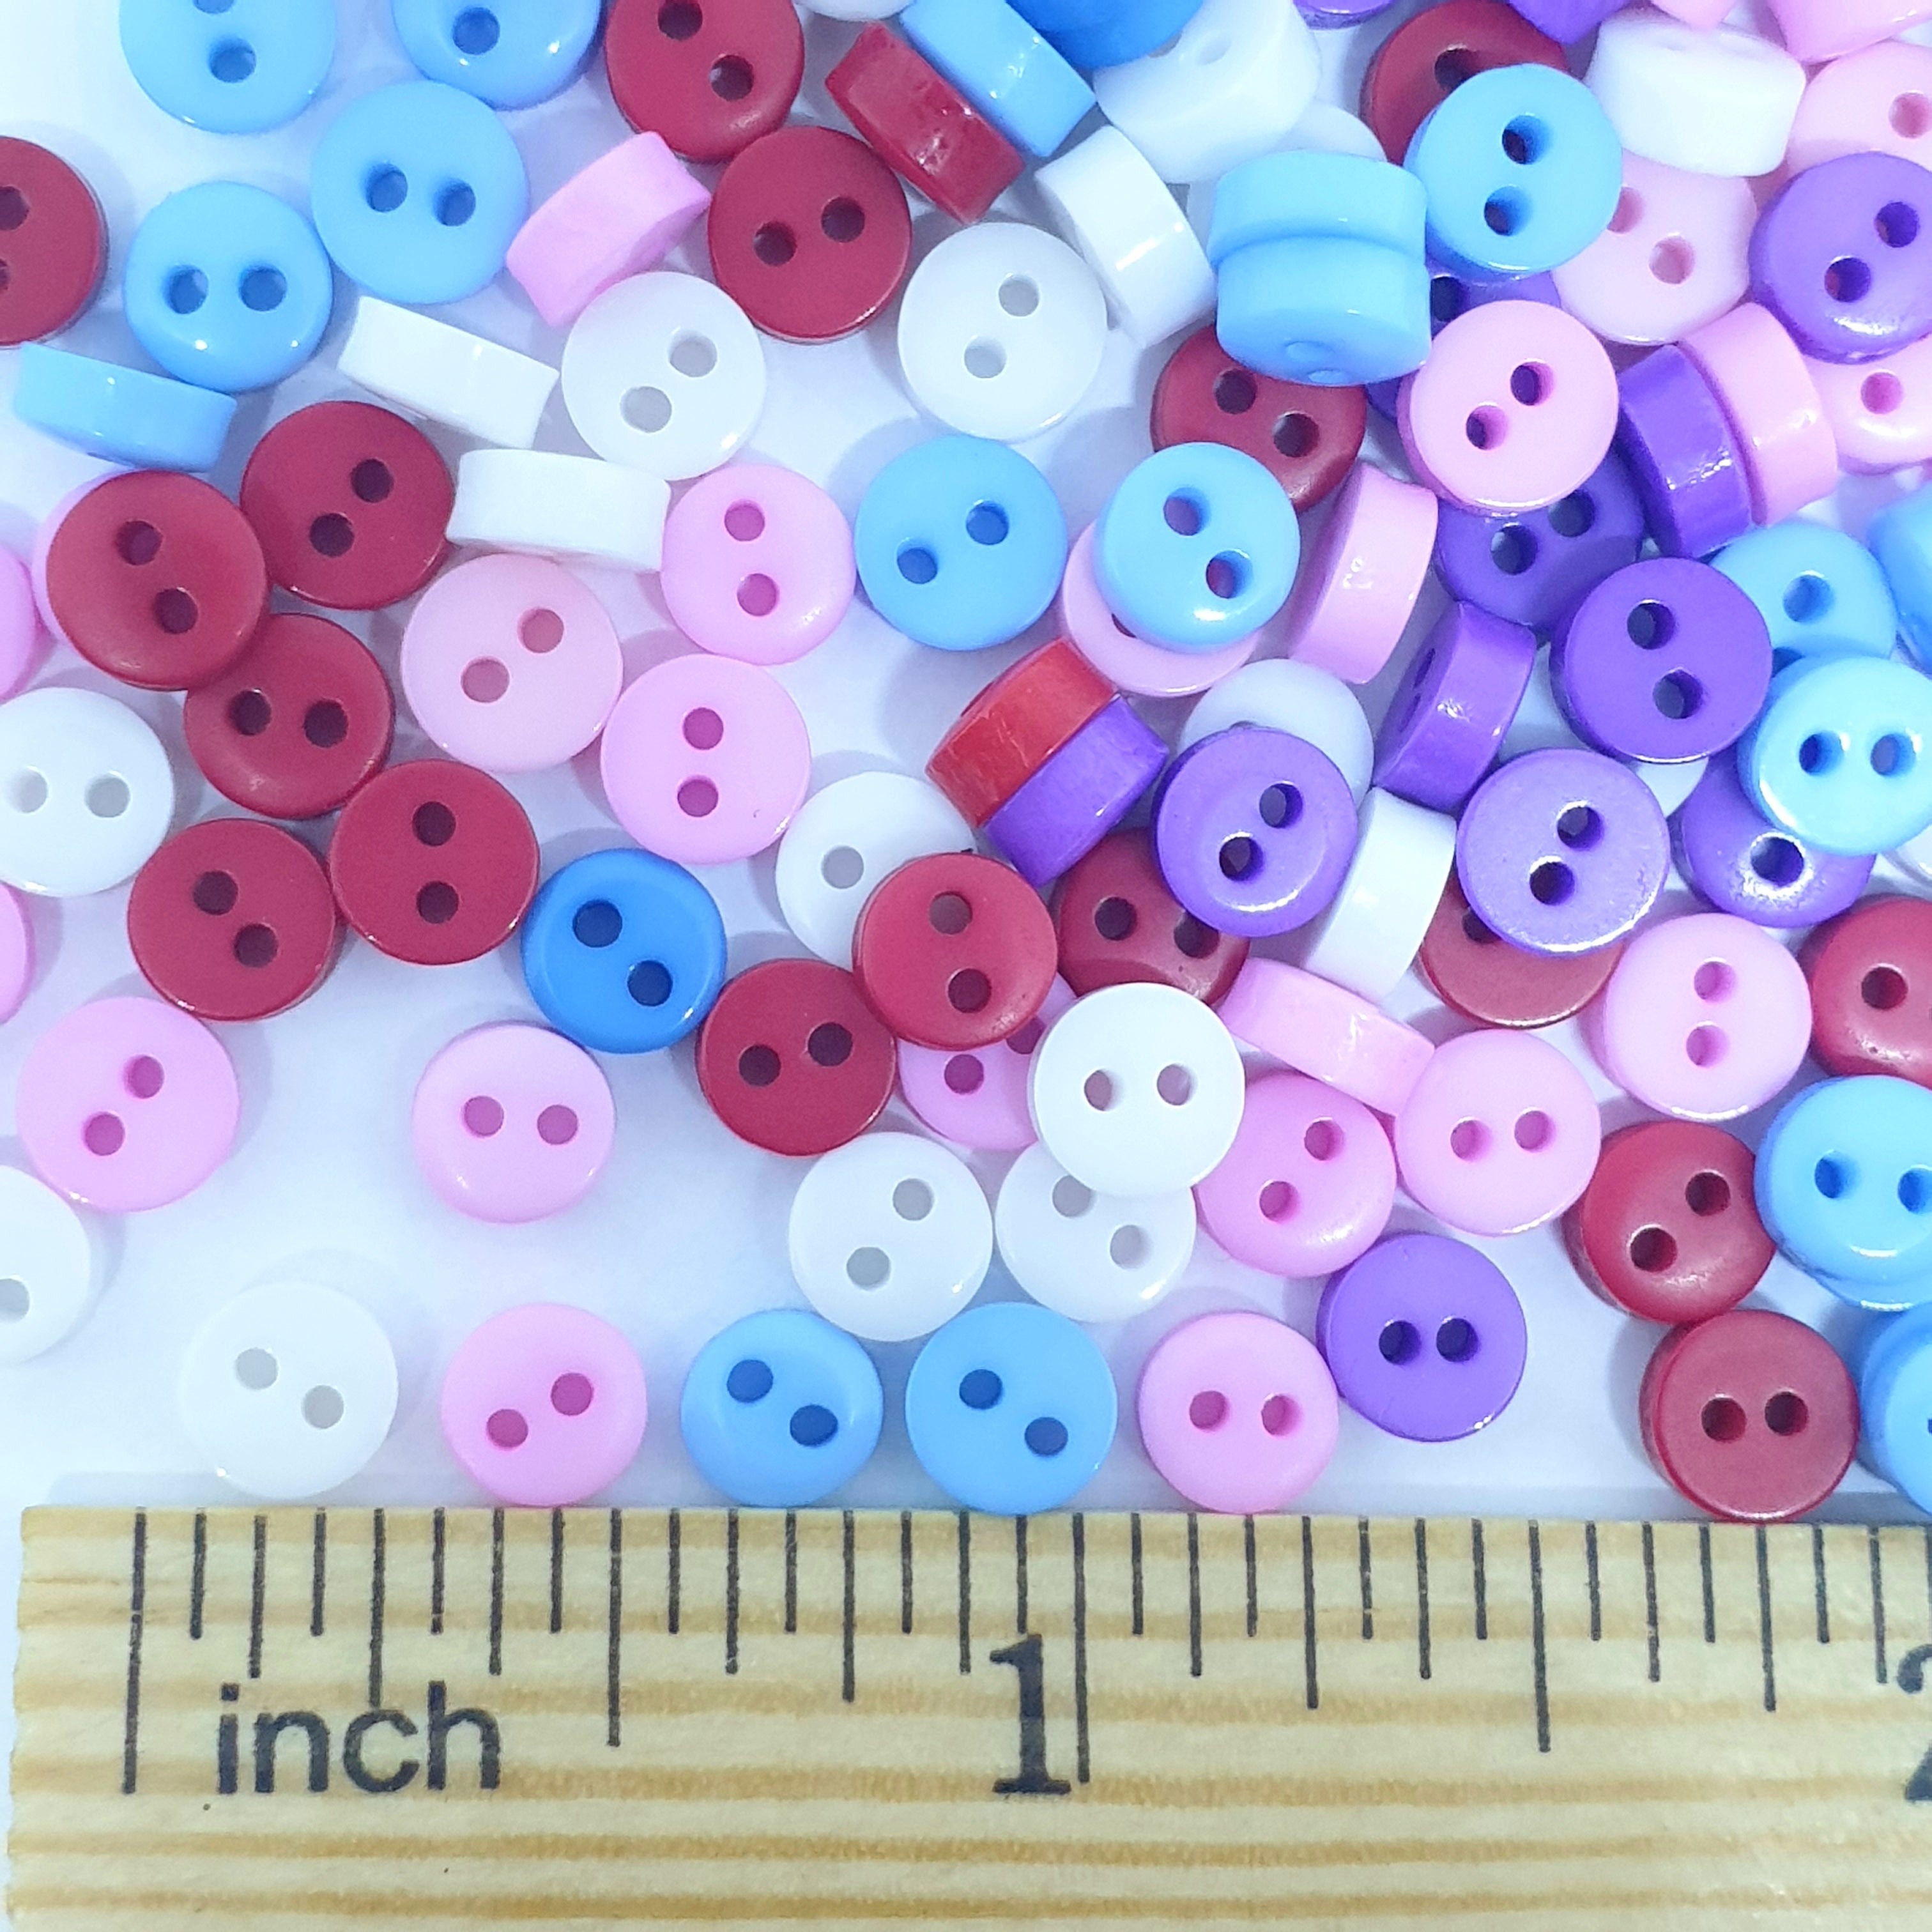 MajorCrafts 240pcs 6mm White Blue Pink Red Purple Mixed 2 Holes Small Round Resin Sewing Button